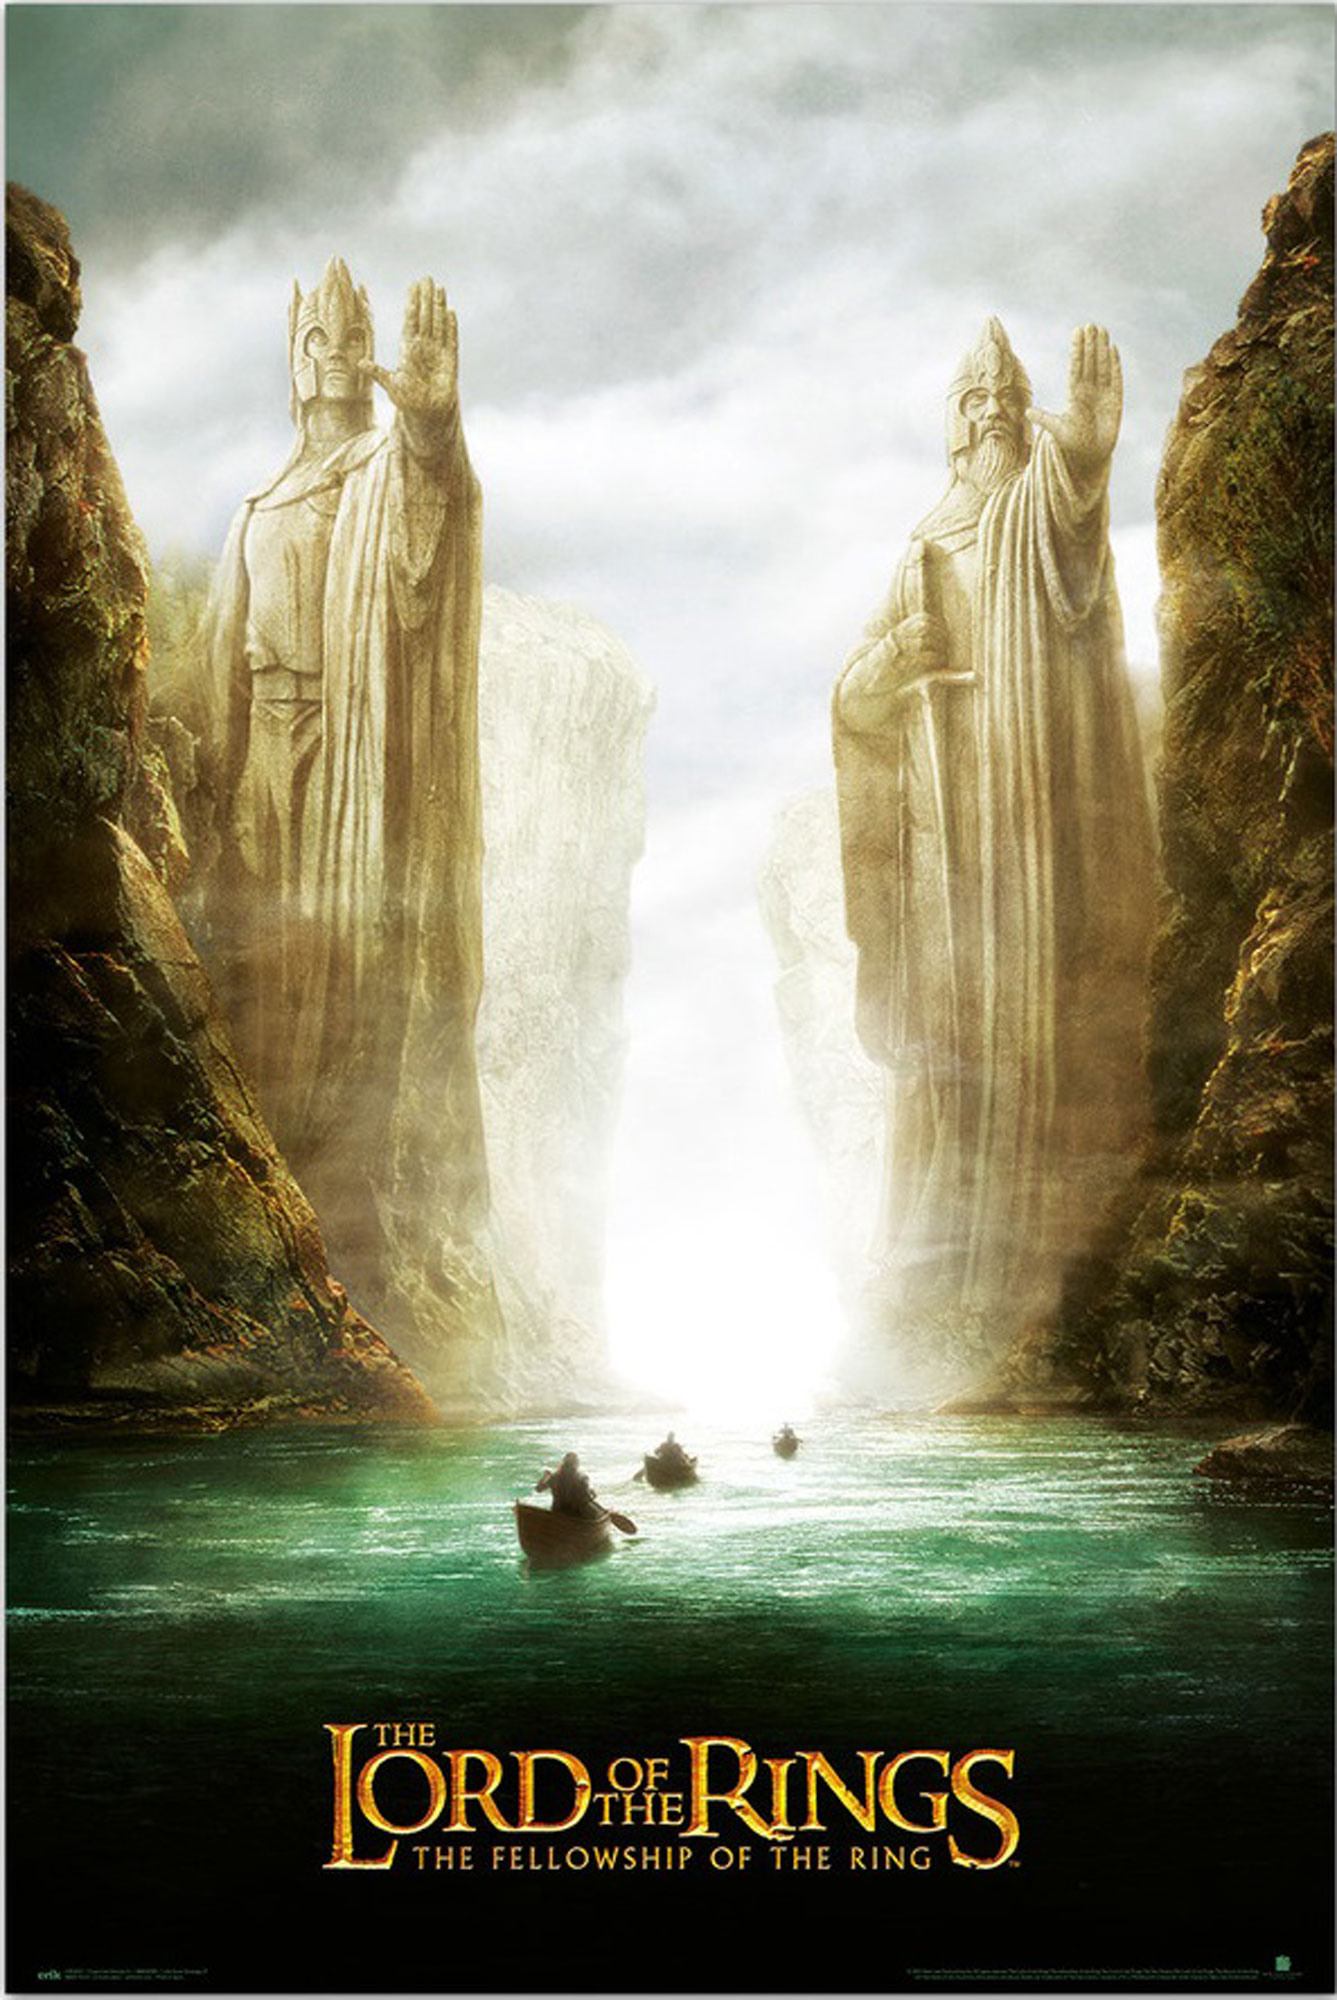 Lord of the Rings, The - Argonath